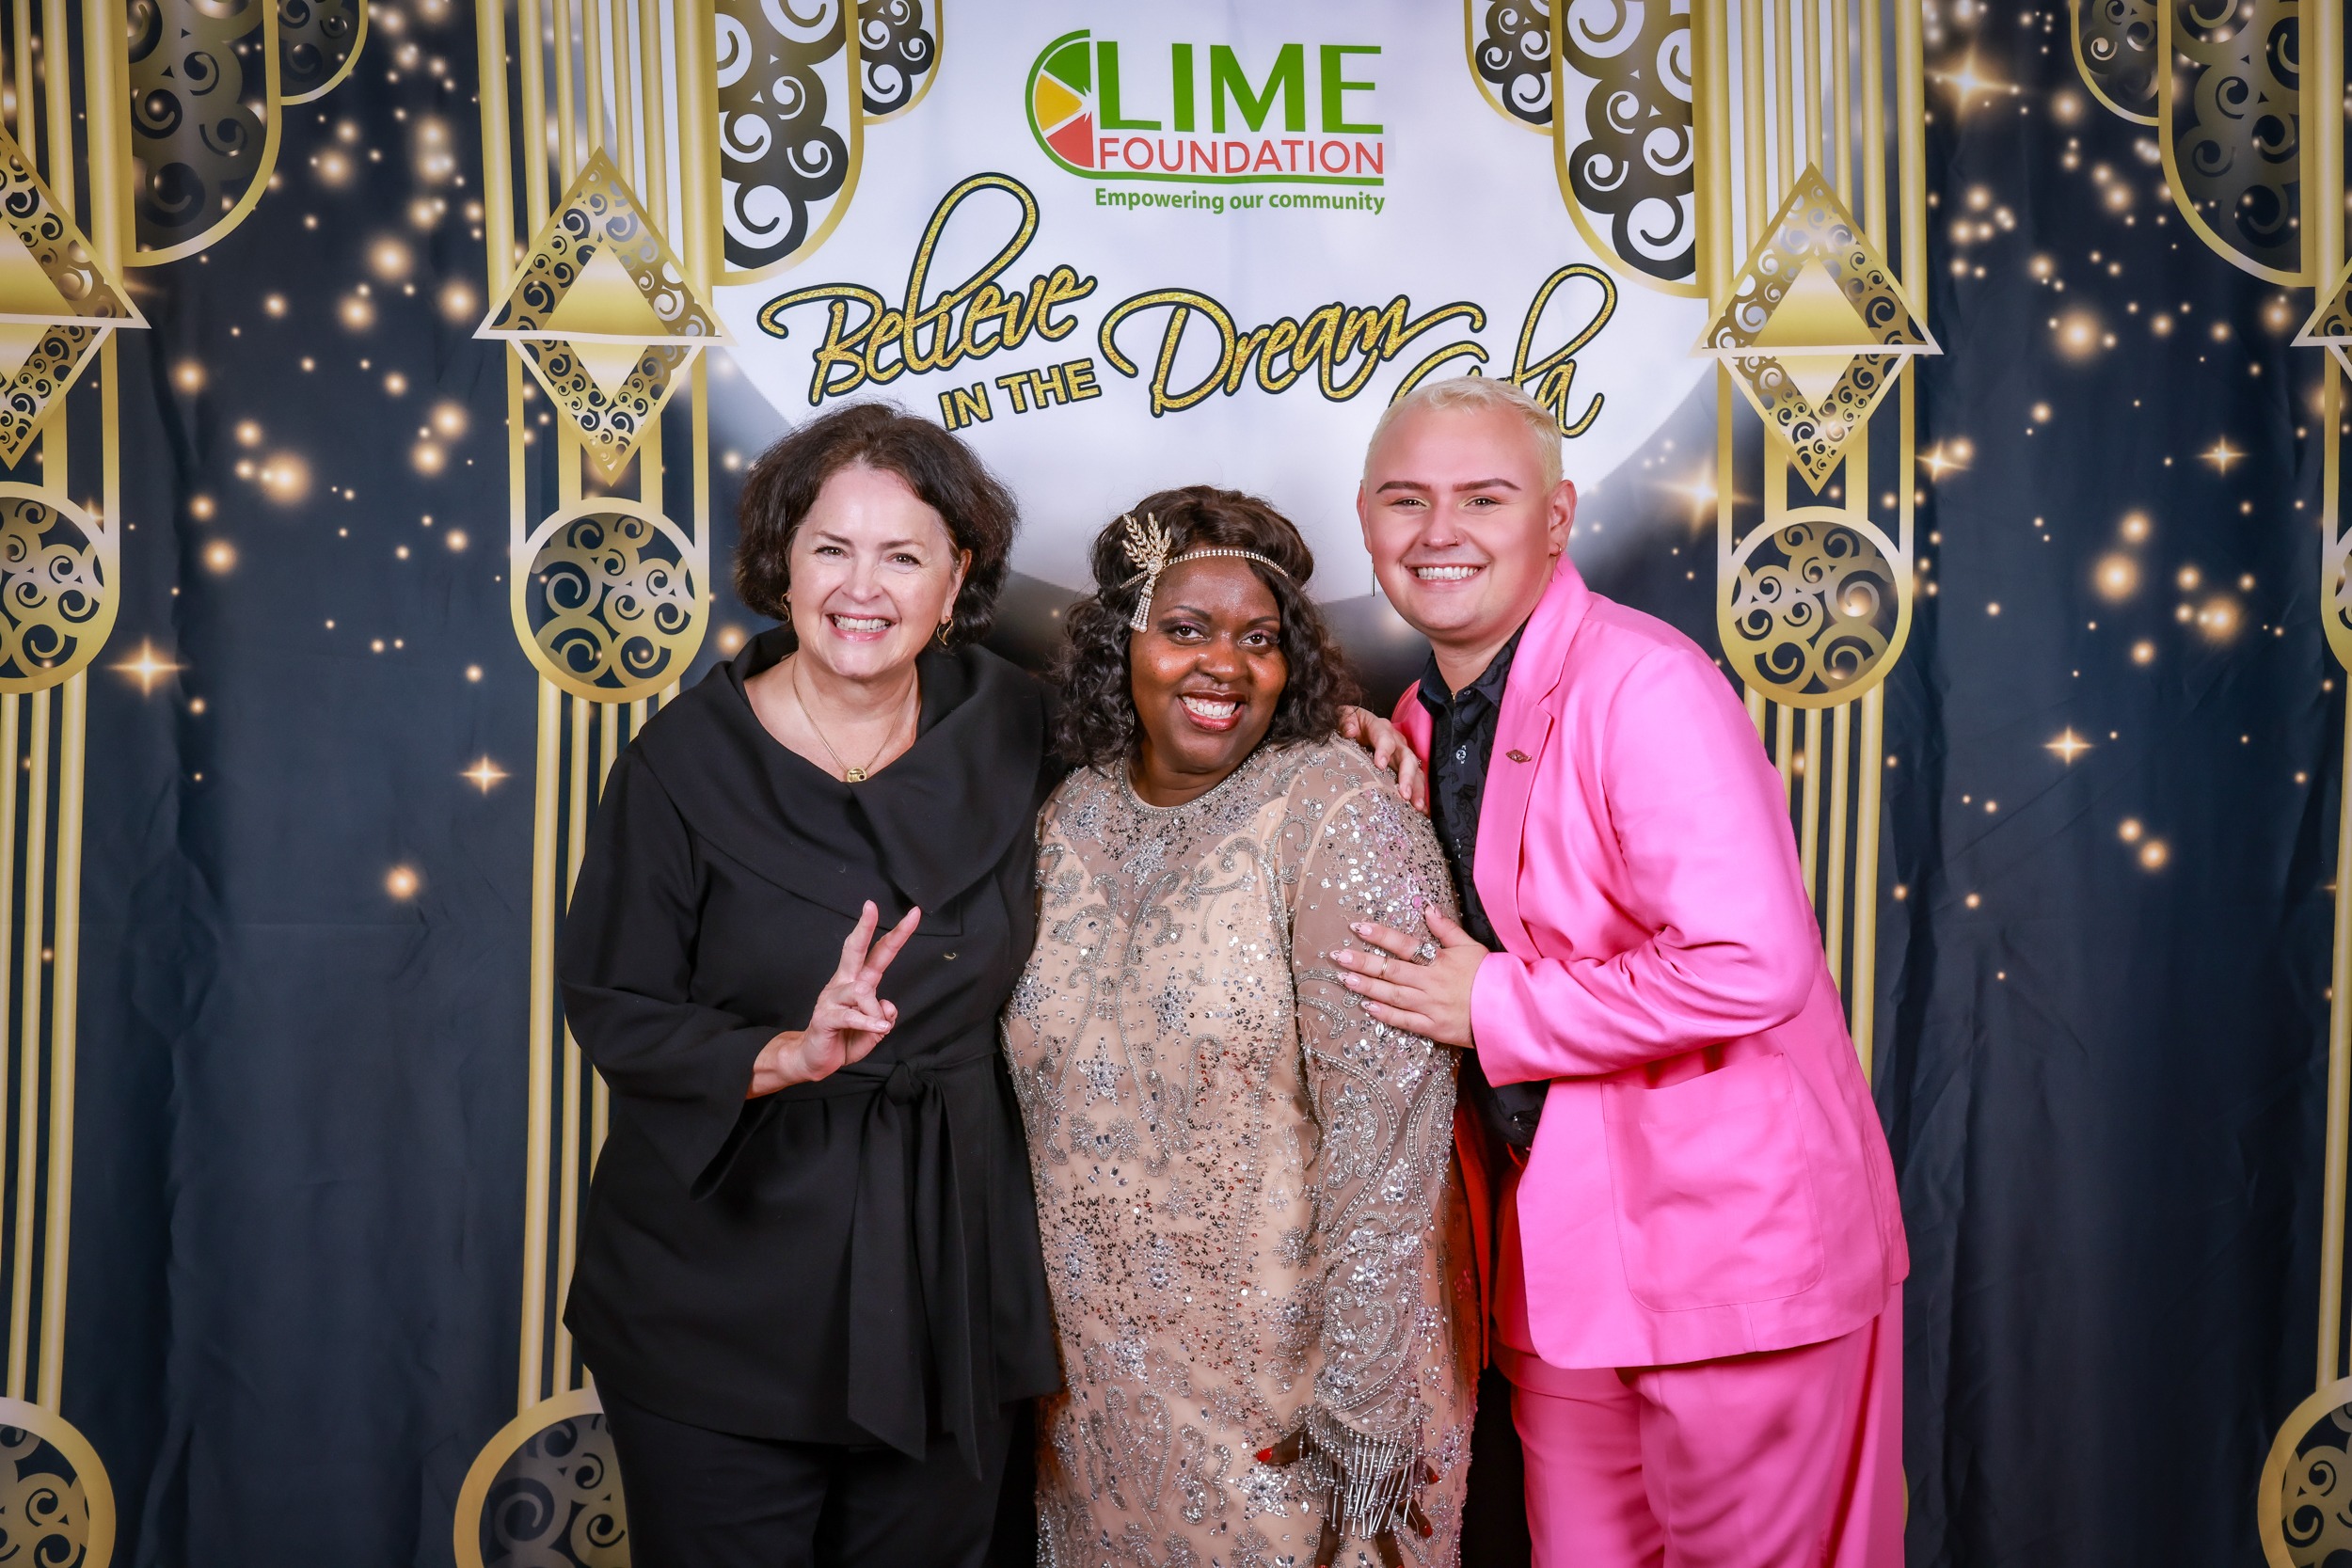 Three women posing for a photo at an event hosted by The LIME Foundation of Santa Rosa.